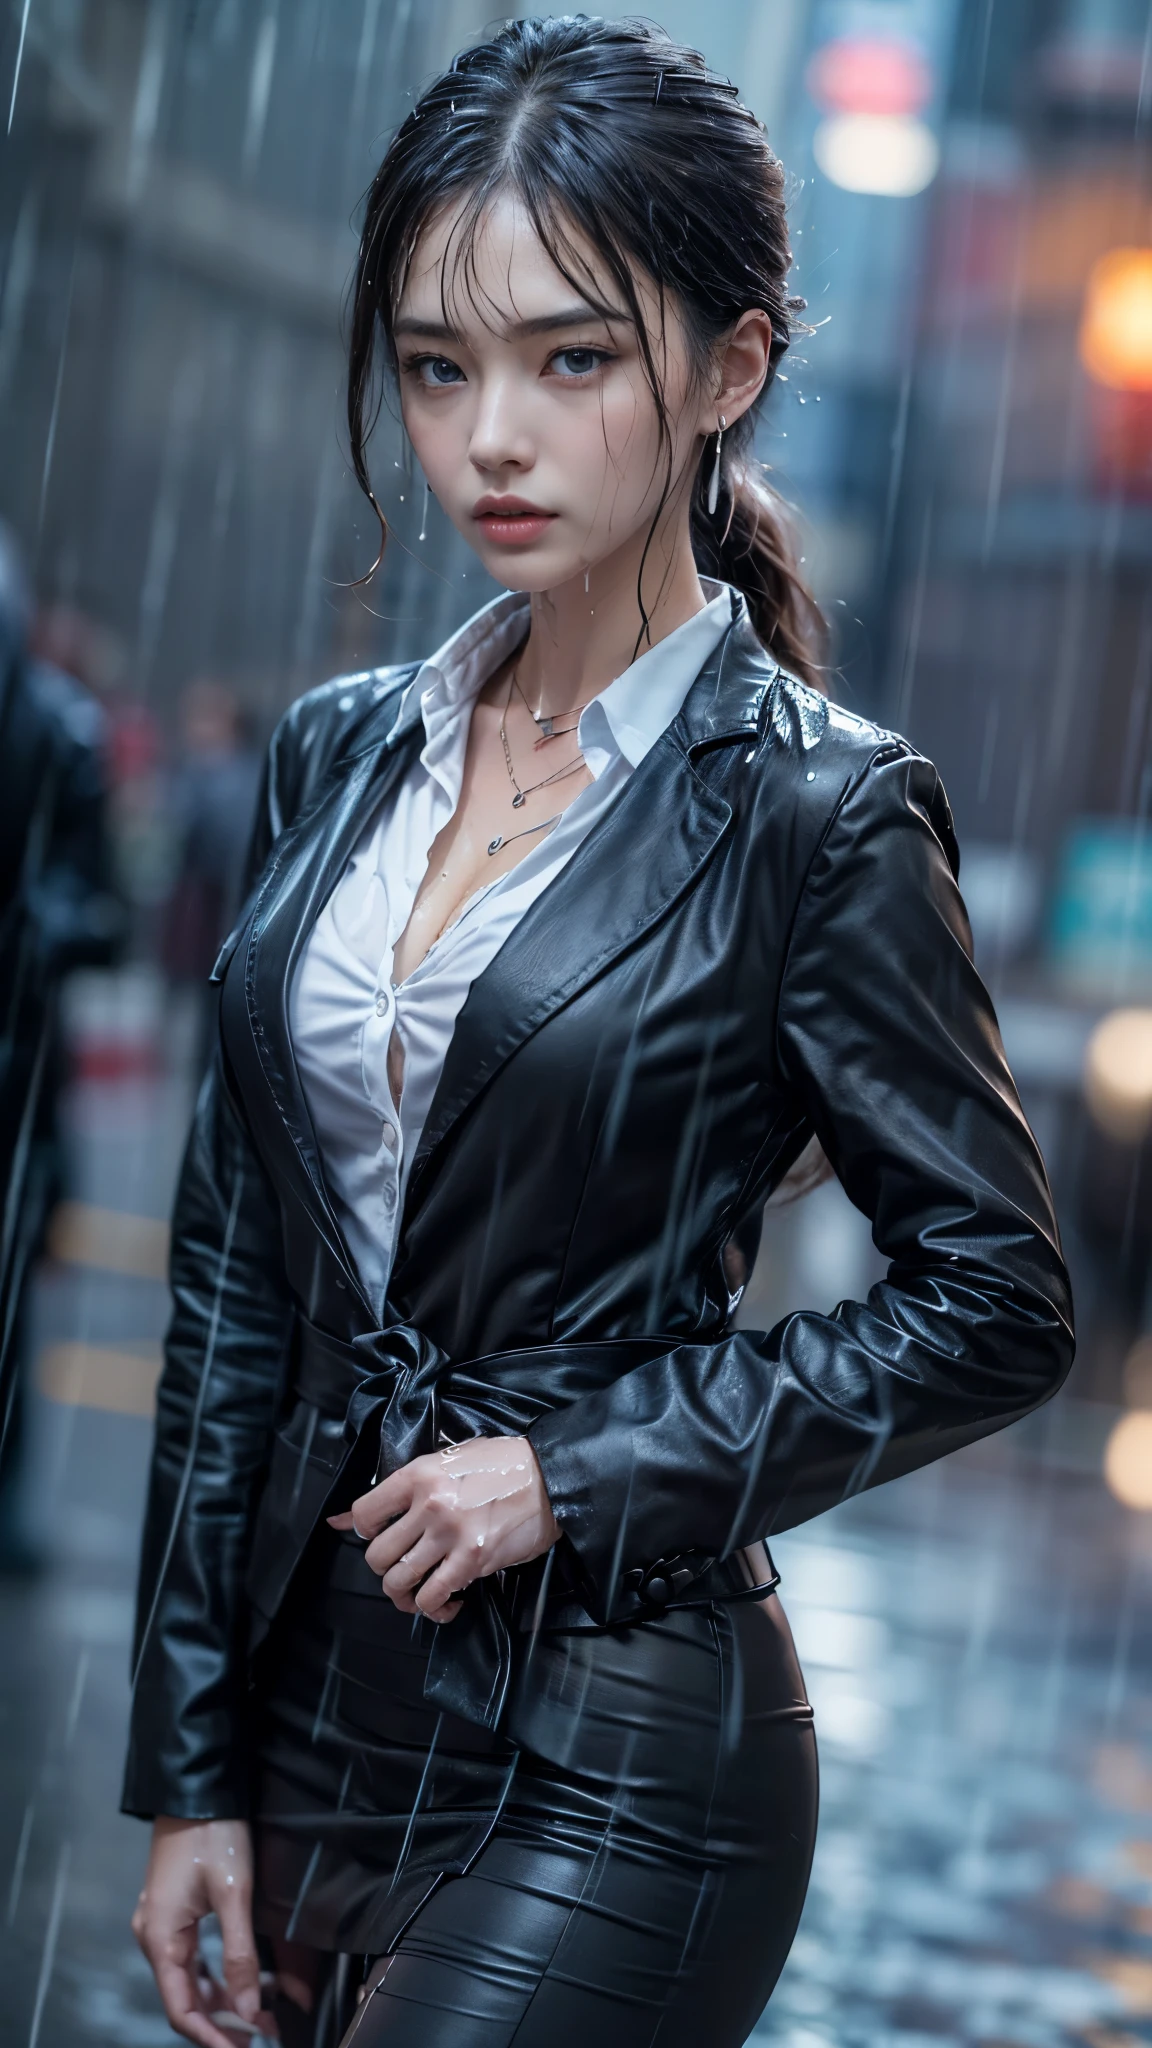 (RAW shooting, Photoreal:1.5, 8K, highest quality, masterpiece, ultra high resolution), perfect dynamic composition:1.2, Night street corner of a modern city, Troubled expression:0.7, look of resignation:0.7, ((((Typhoon heavy rain)))), Highly detailed skin and facial textures:1.2, Slim office lady wet in the rain:1.3, Fair skin:1.2, sexy beauty:1.1, perfect style:1.2, beautiful and aesthetic:1.1, very beautiful face:1.2, water droplets on the skin, (rain drips all over my body:1.2, wet body:1.2, wet hair:1.3, wet office skirt:1.2, wet office lady uniform:1.3), belt, (Medium chest, Bra see-through, Chest gap), (The expression on your face when you feel intense caress, Facial expression when feeling pleasure), (beautiful blue eyes, Eyes that feel beautiful eros:0.8), (Too erotic:0.9, Bewitching:0.9), cowboy shot, Shoulder bag, necklace, earrings, bracelet, clock